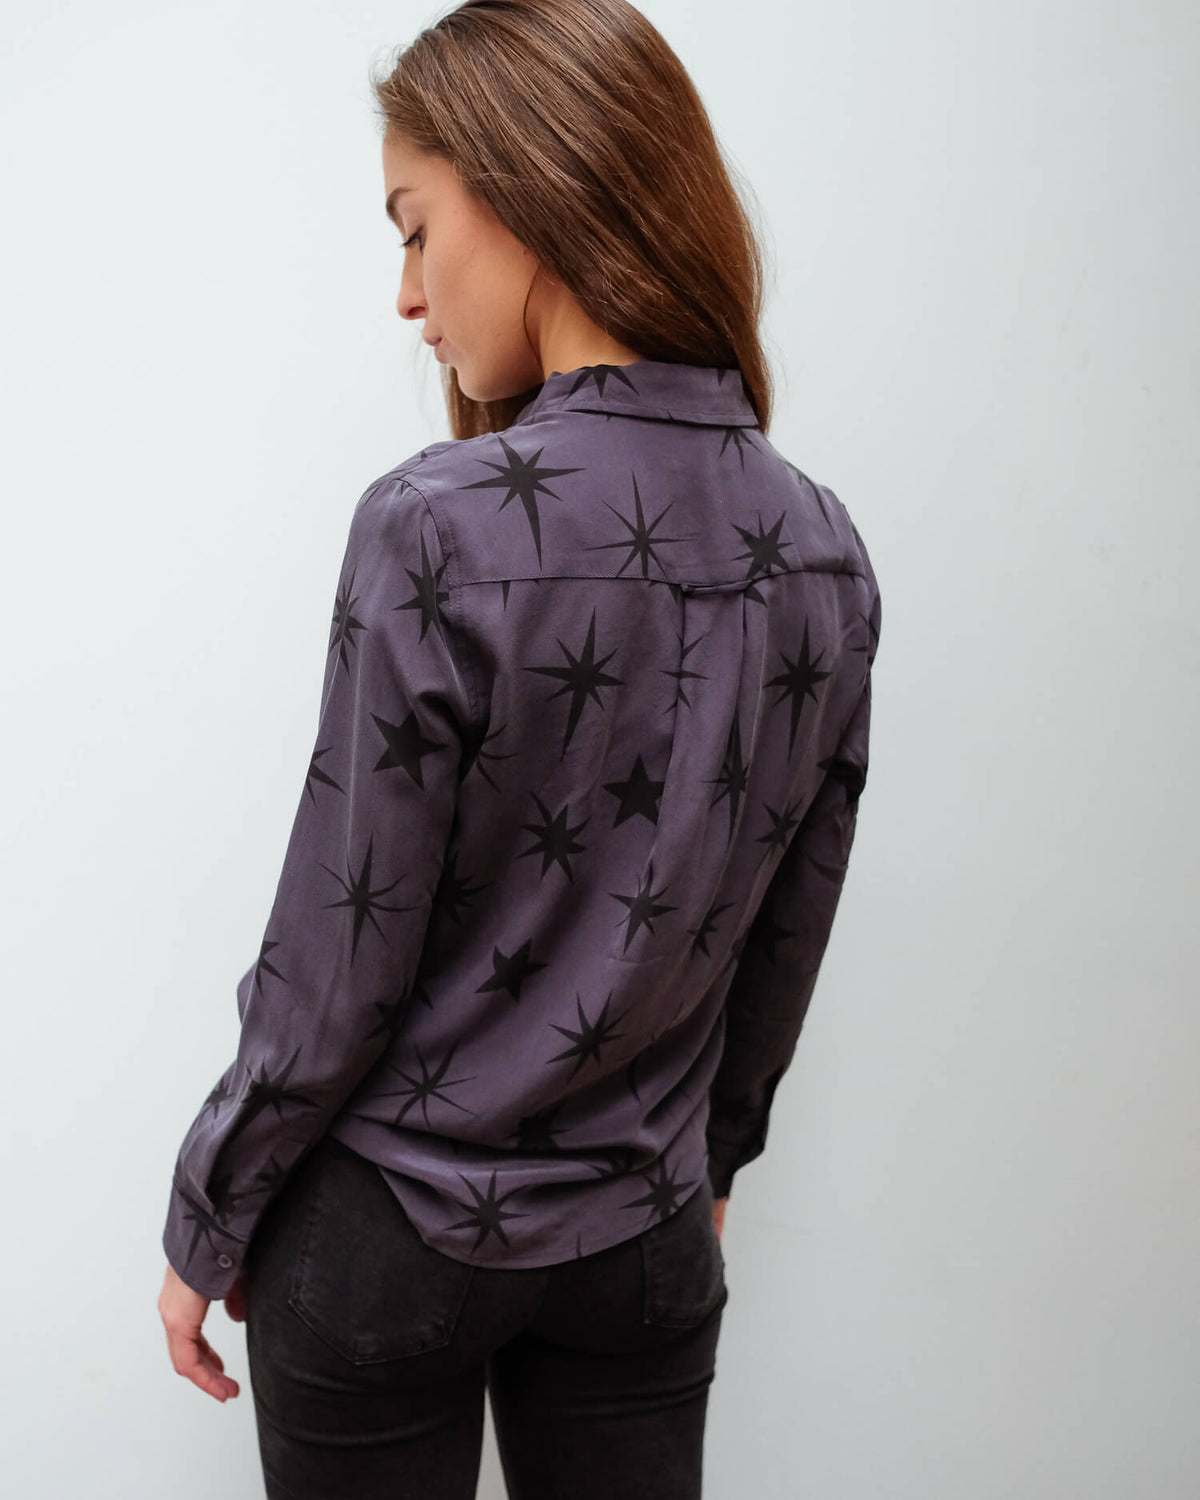 R Kate shirt in charcoal constellations